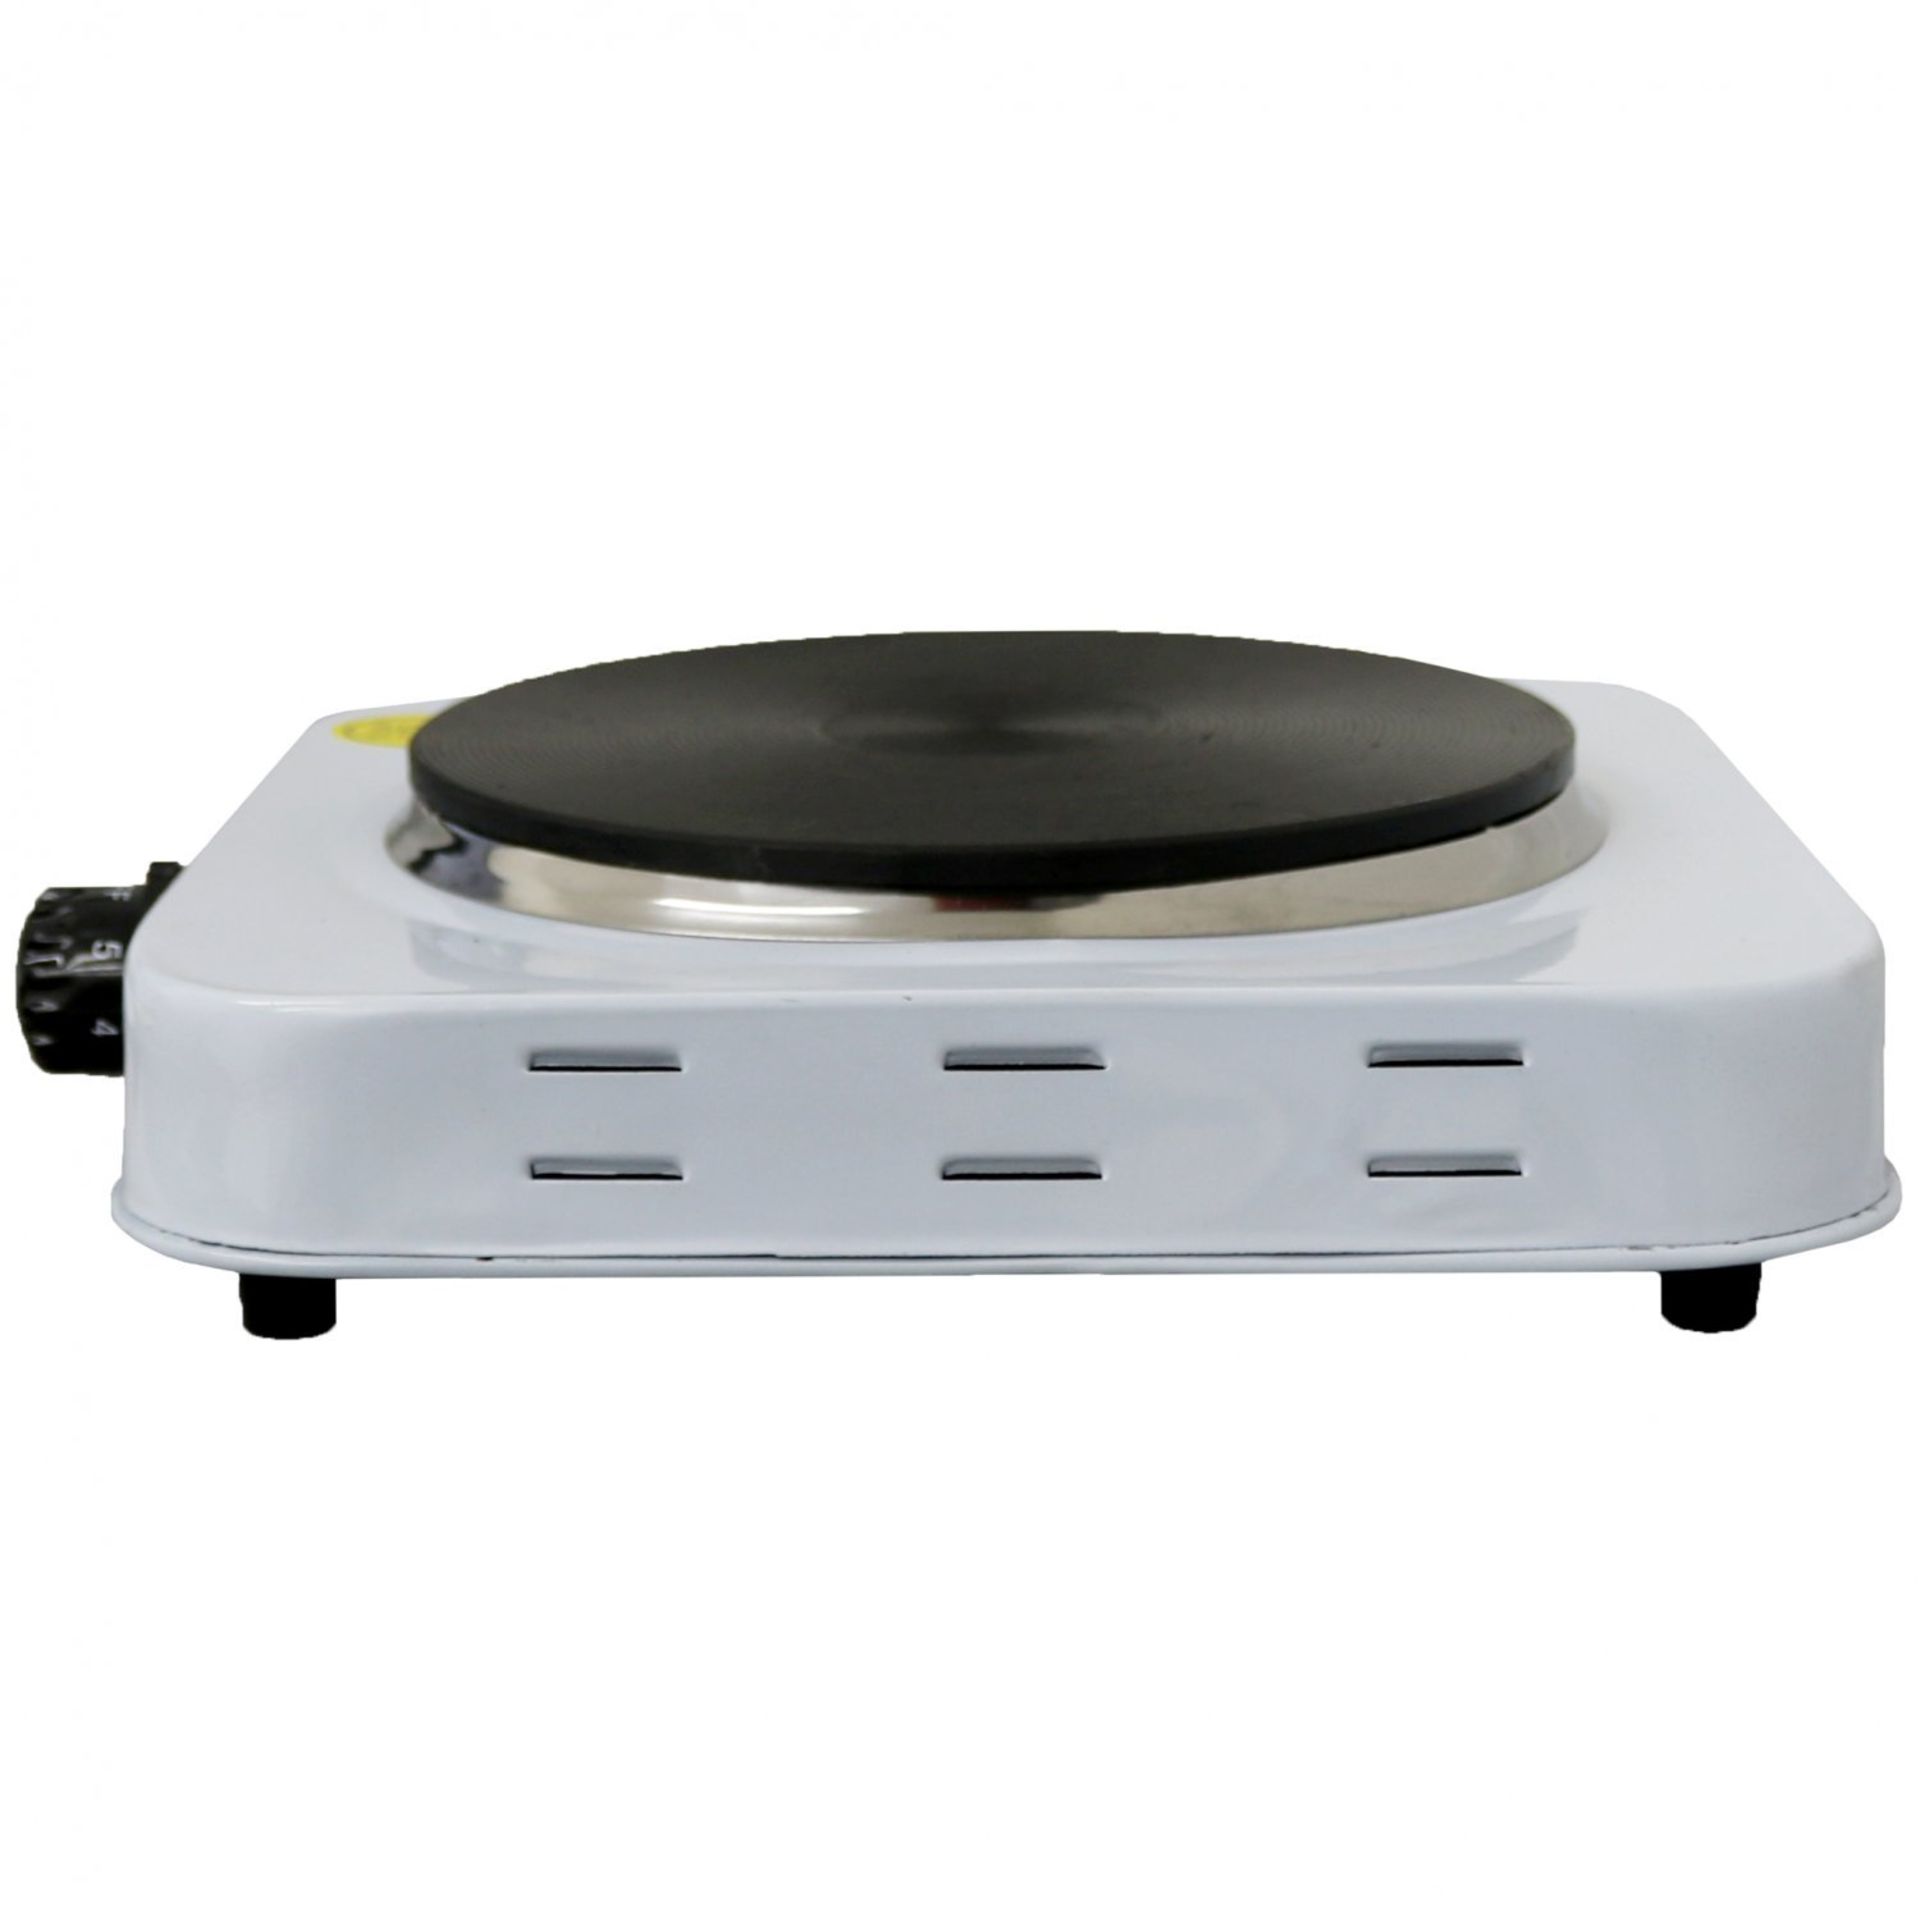 (SP470) 1.5kW Electric Portable Kitchen Hot Plate The 1.5kW electric hot plate is an easy to... - Image 2 of 2